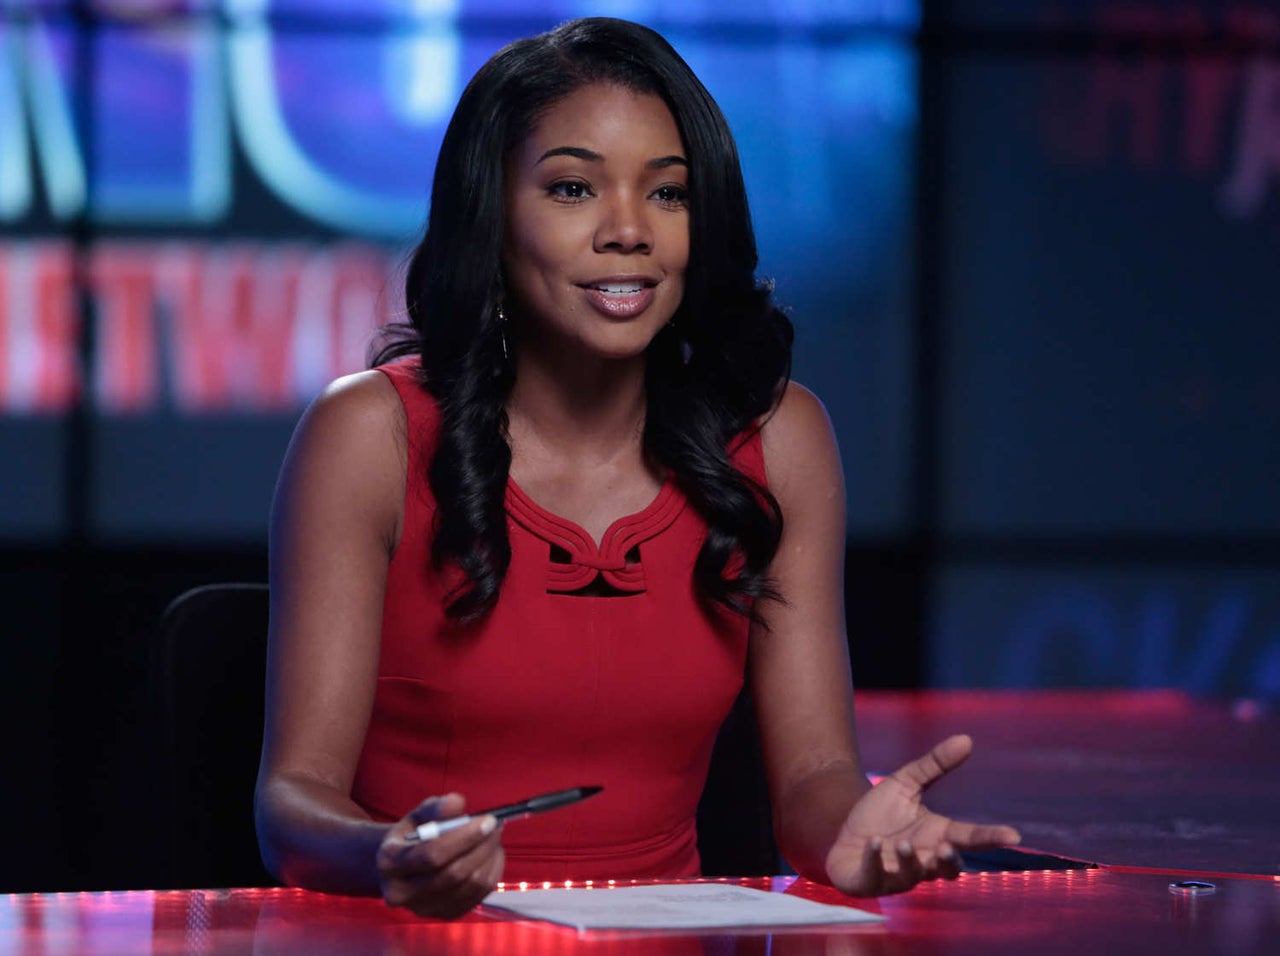 What Are Your Predictions for the New Season of 'Being Mary Jane'?